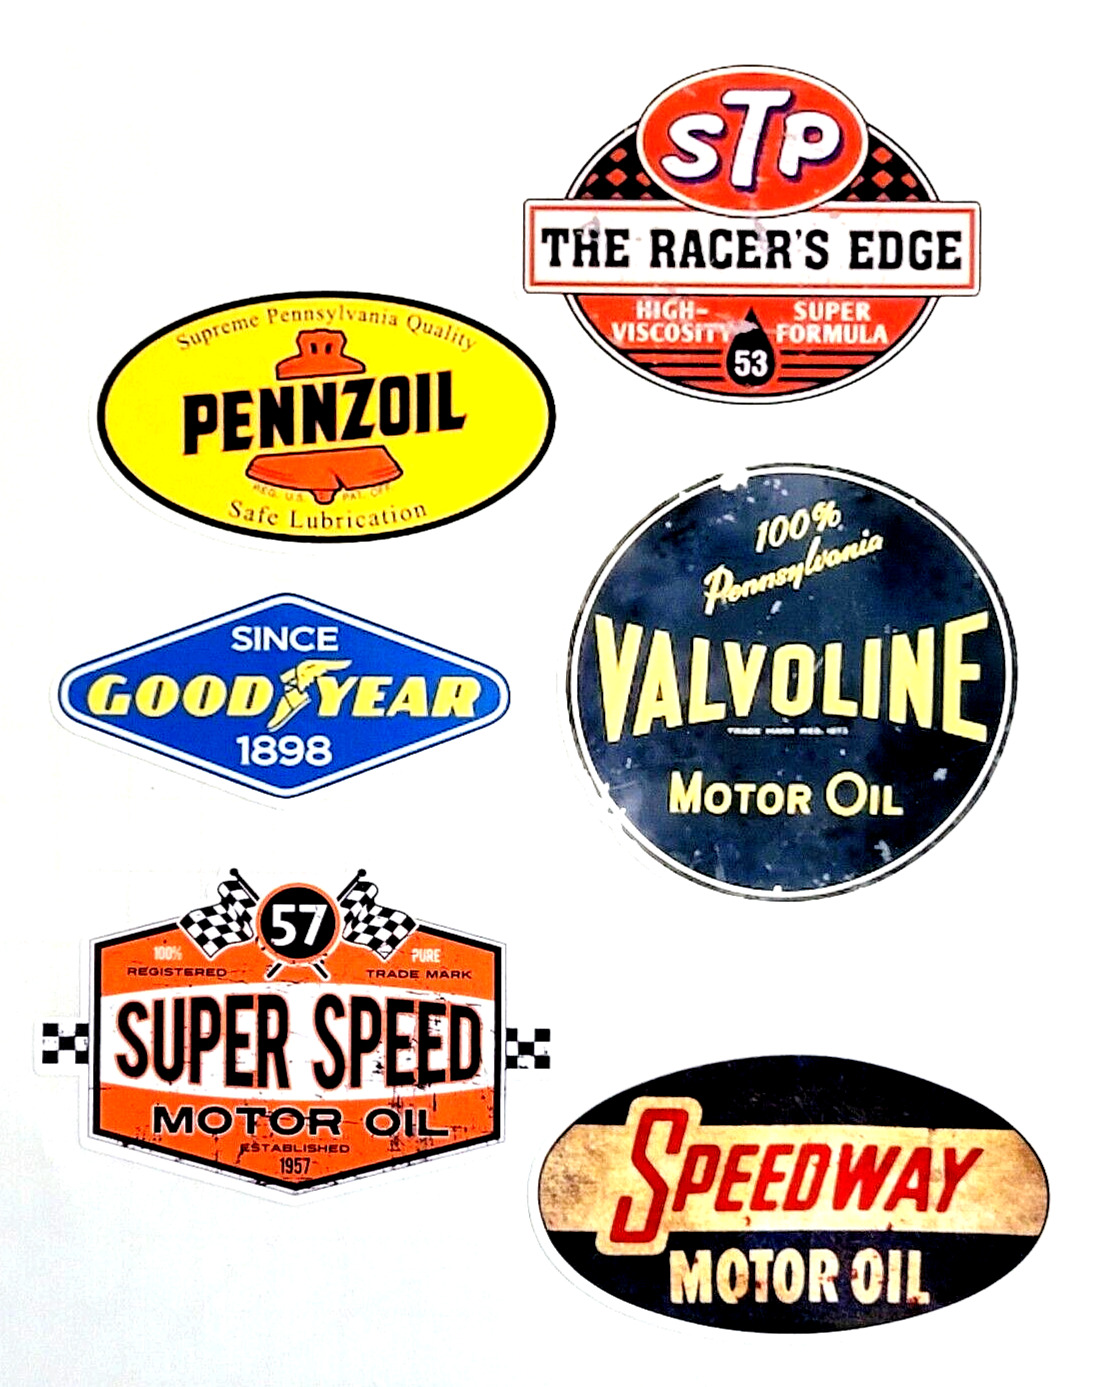 Set of 6 Vintage Motor Oil Cooler Toolbox Window Stickers Car Truck 3inch